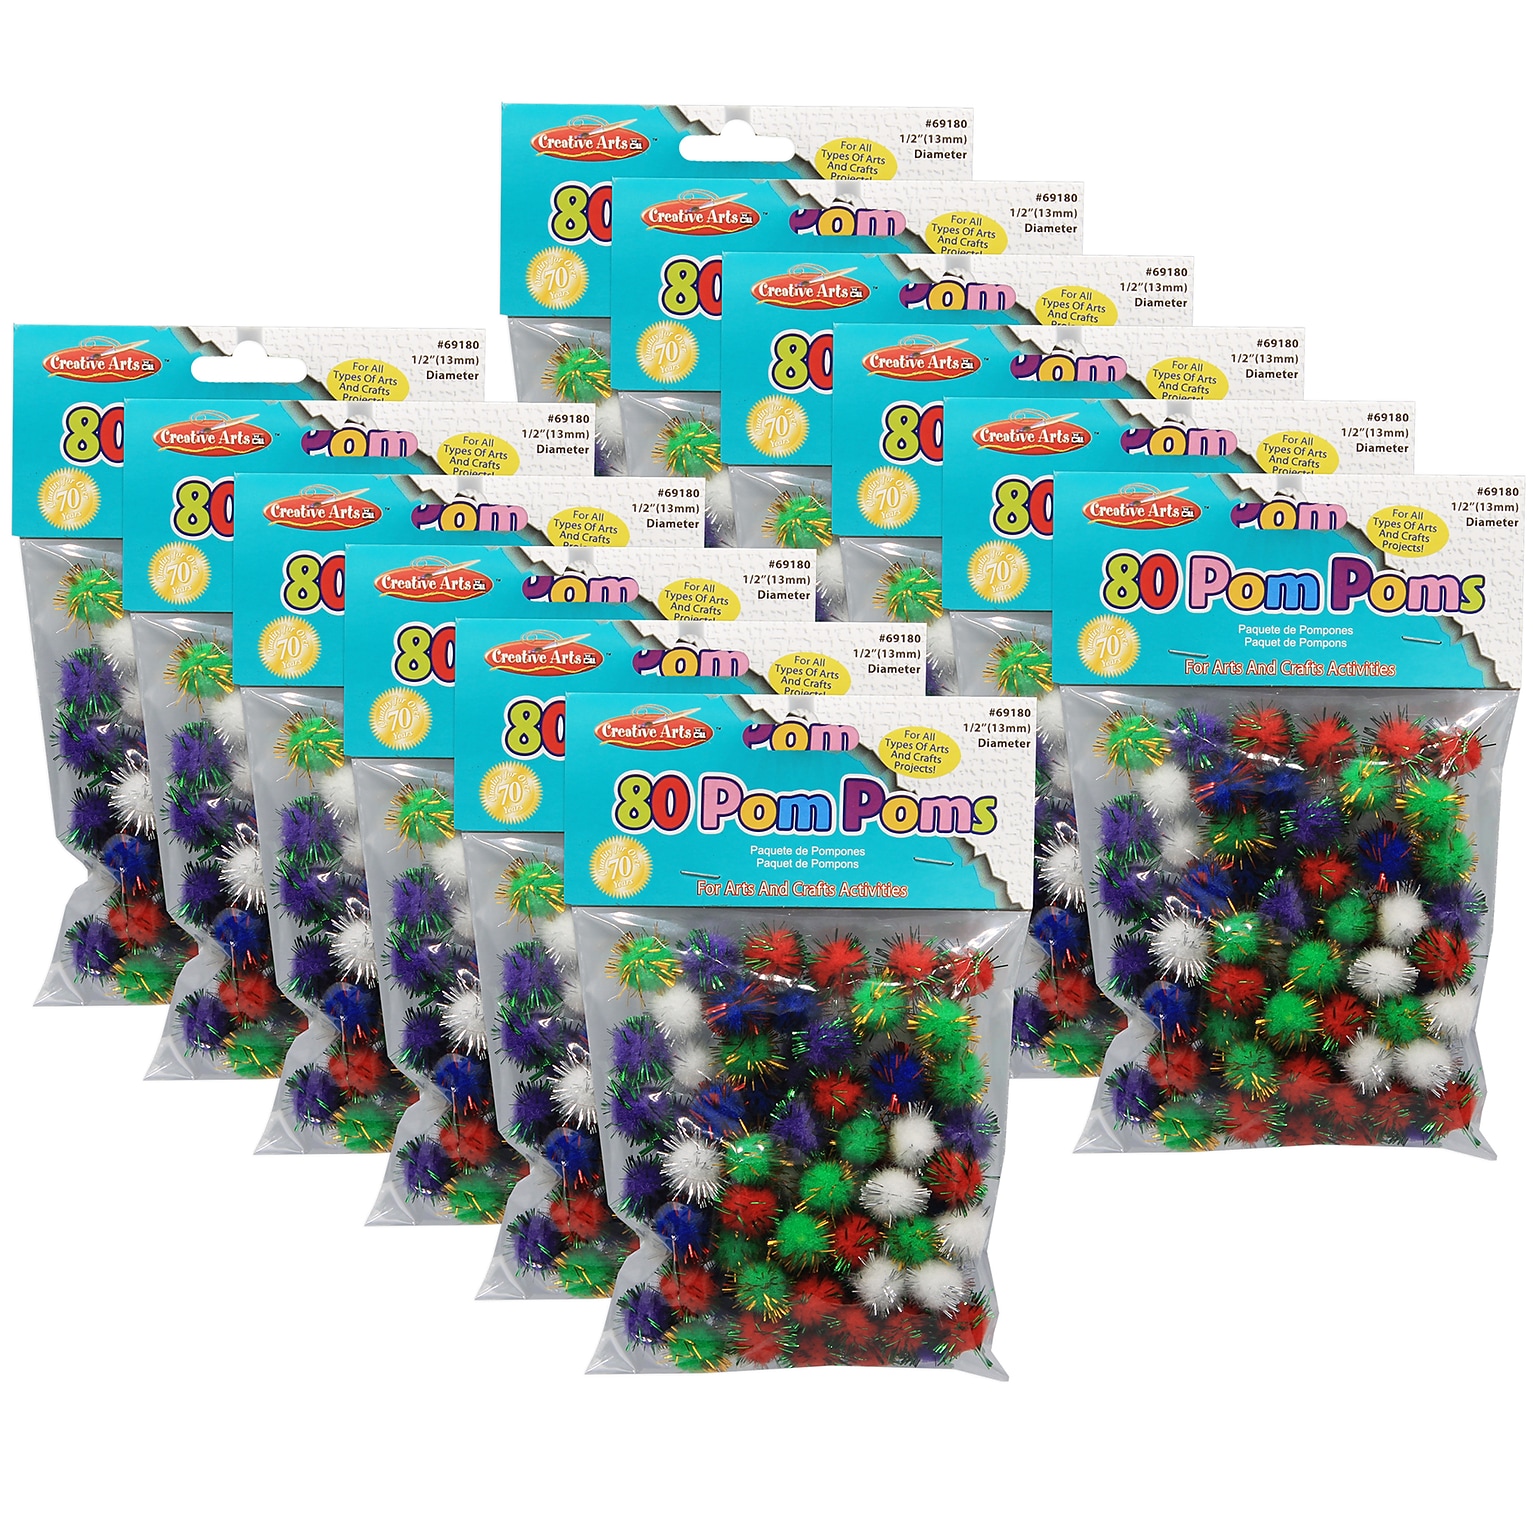 CLI Pom-Poms 1/2, Assorted Glitter Colors, 80/Pack, 12 Packs (CHL69180-12)